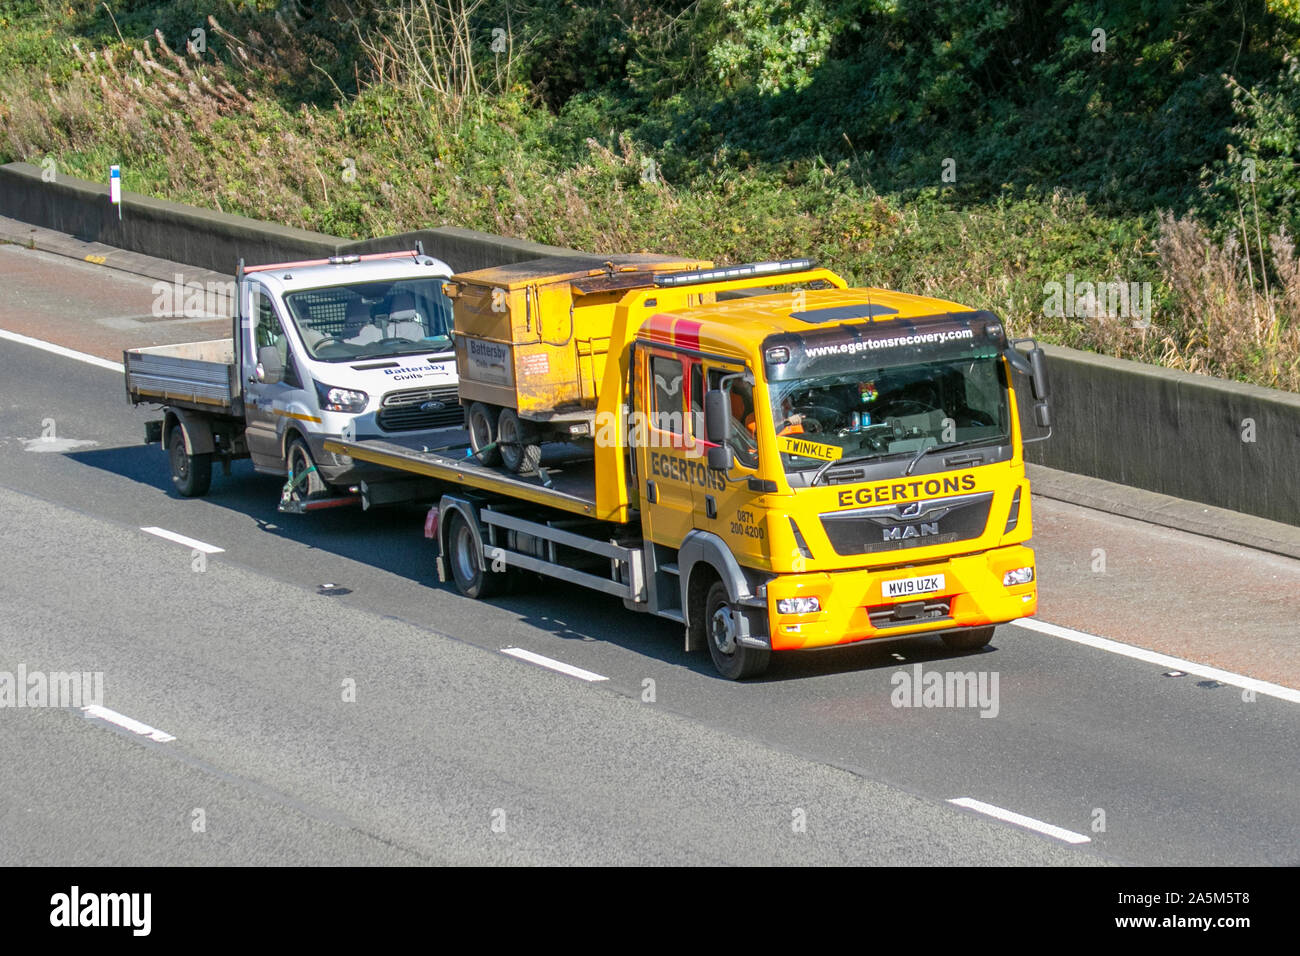 TWINKLE driving EGERTONS recovery Haulage delivery trucks, haulage, lorry, transportation, truck, cargo, MAN vehicle, delivery, transport, industry, supply chain freight, on the M6 at Lancaster, UK Stock Photo